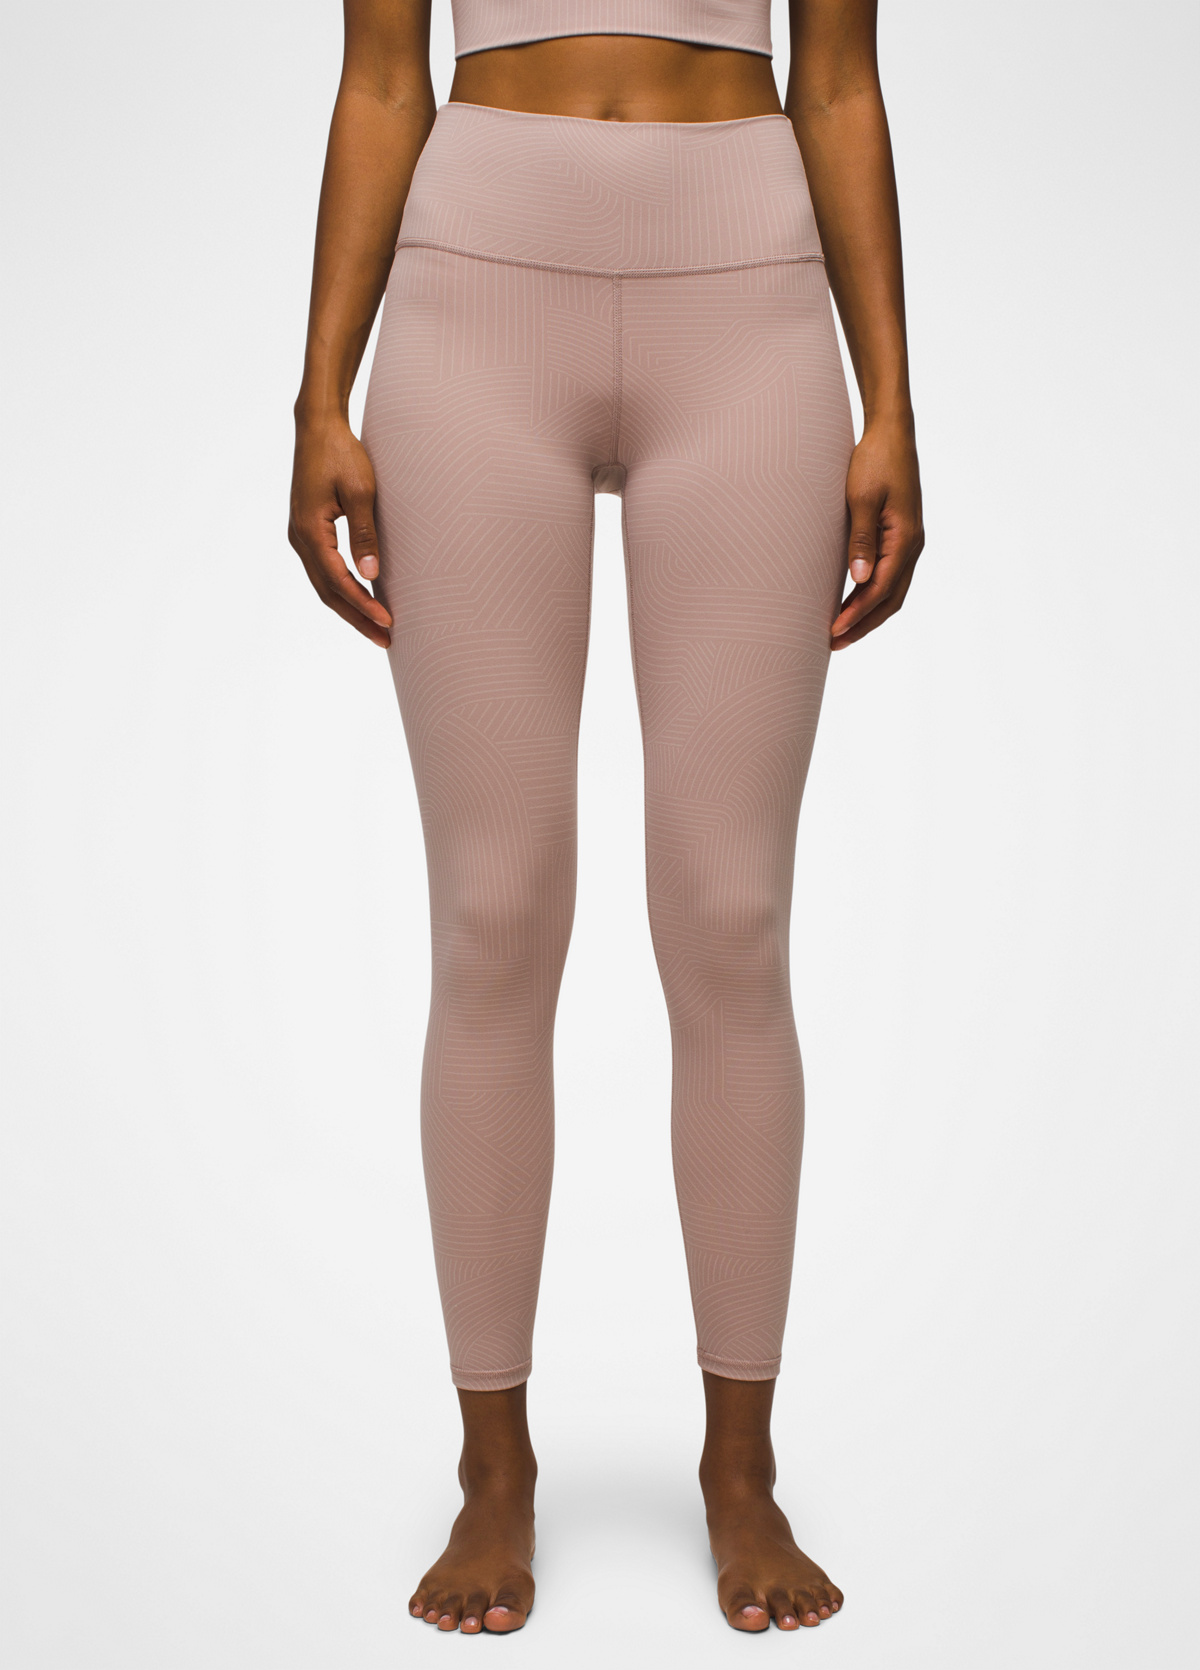 prAna Sopra Seamless Leggings - Women's, Extra Small, — Womens Clothing  Size: Extra Small, Womens Waist Size: 25 - 26 in, Inseam Size: 24 in,  Gender: Female — 1970151-001-XS — 67% Off - 1 out of 6 models